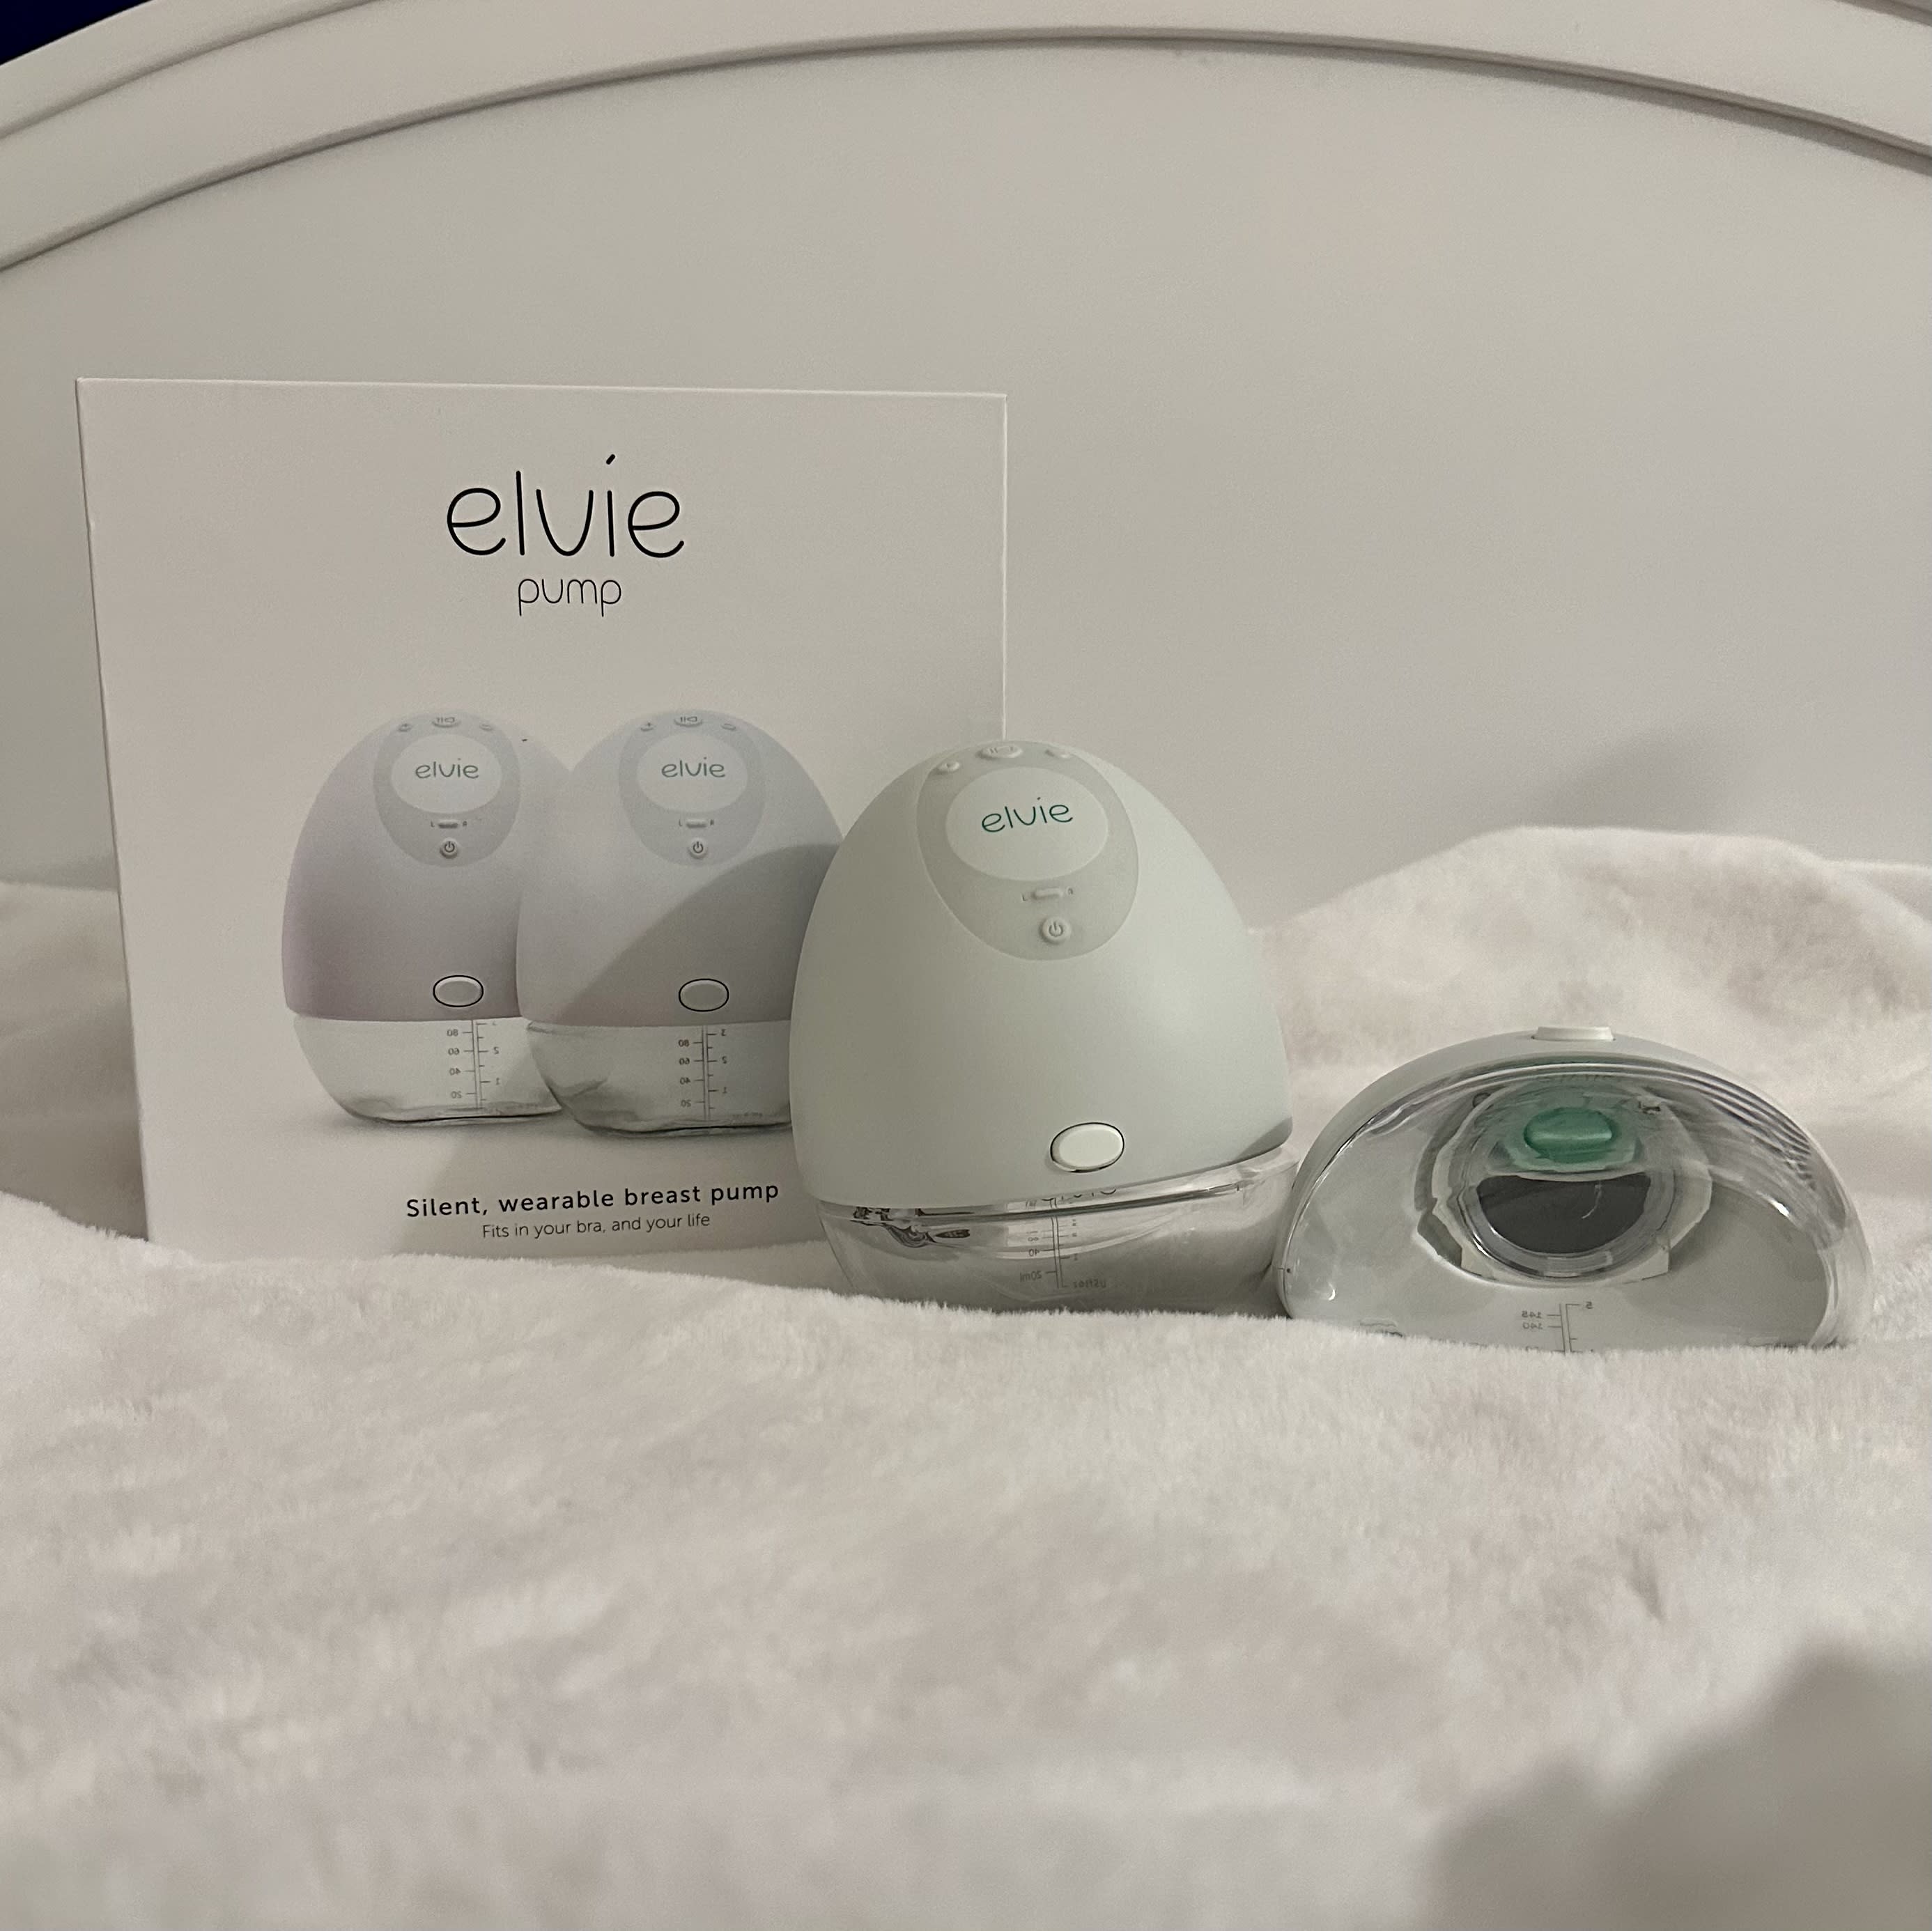 Elvie Pump vs Willow Pump Pros and Cons